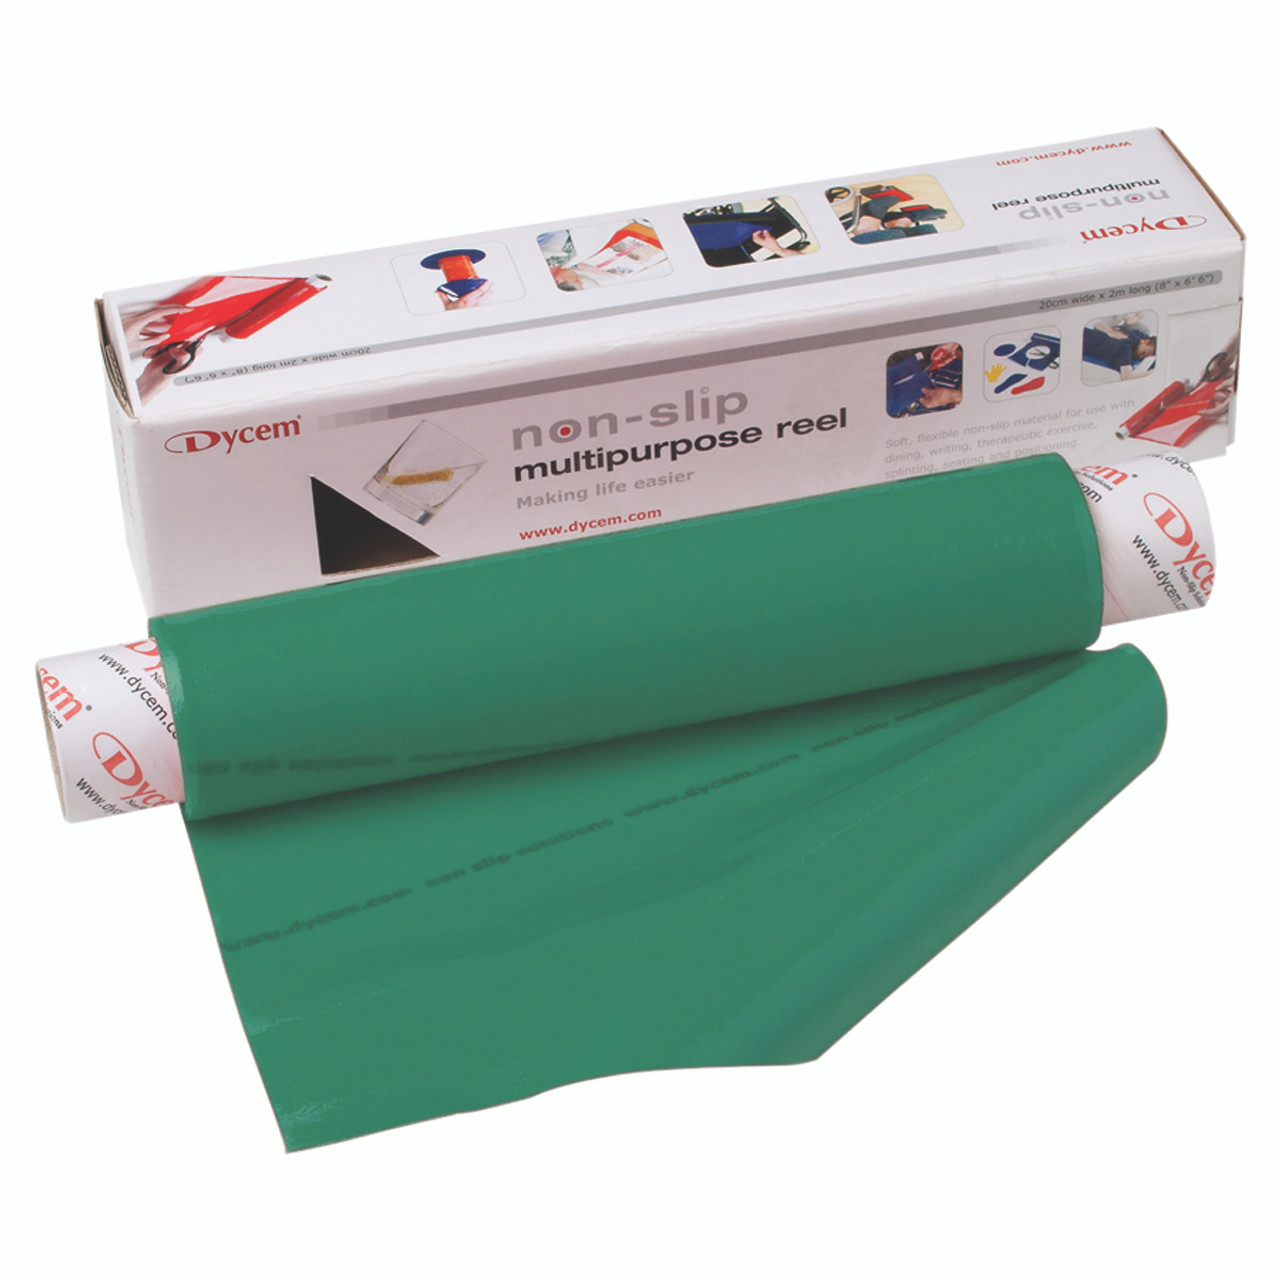 Dycem¨ non-slip material, roll, 16"x6-1/2 foot, forest green